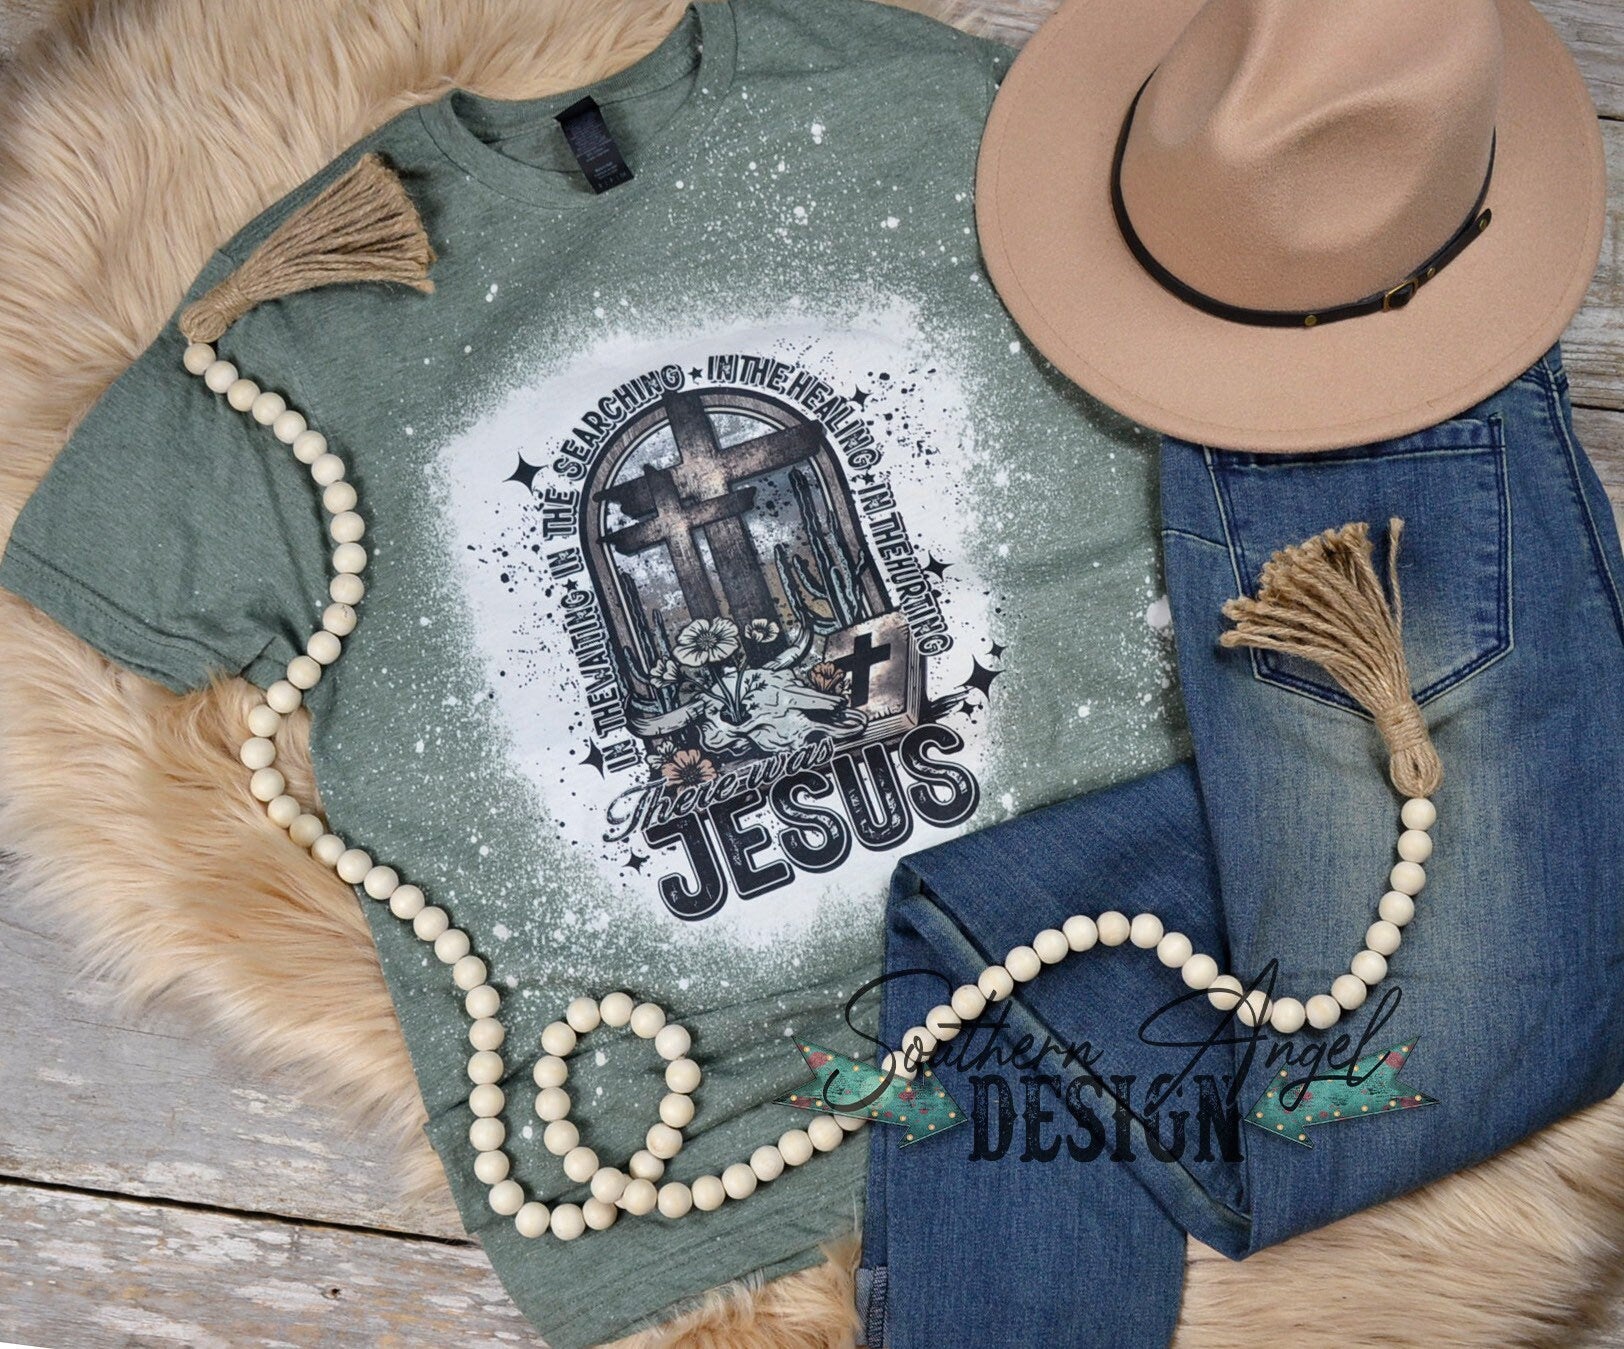 Bleached There Was Jesus TShirt, Religious t-shirt, Faith, Love Like Jesus t-shirt, Cross shirt, positive TShirt, Inspirational